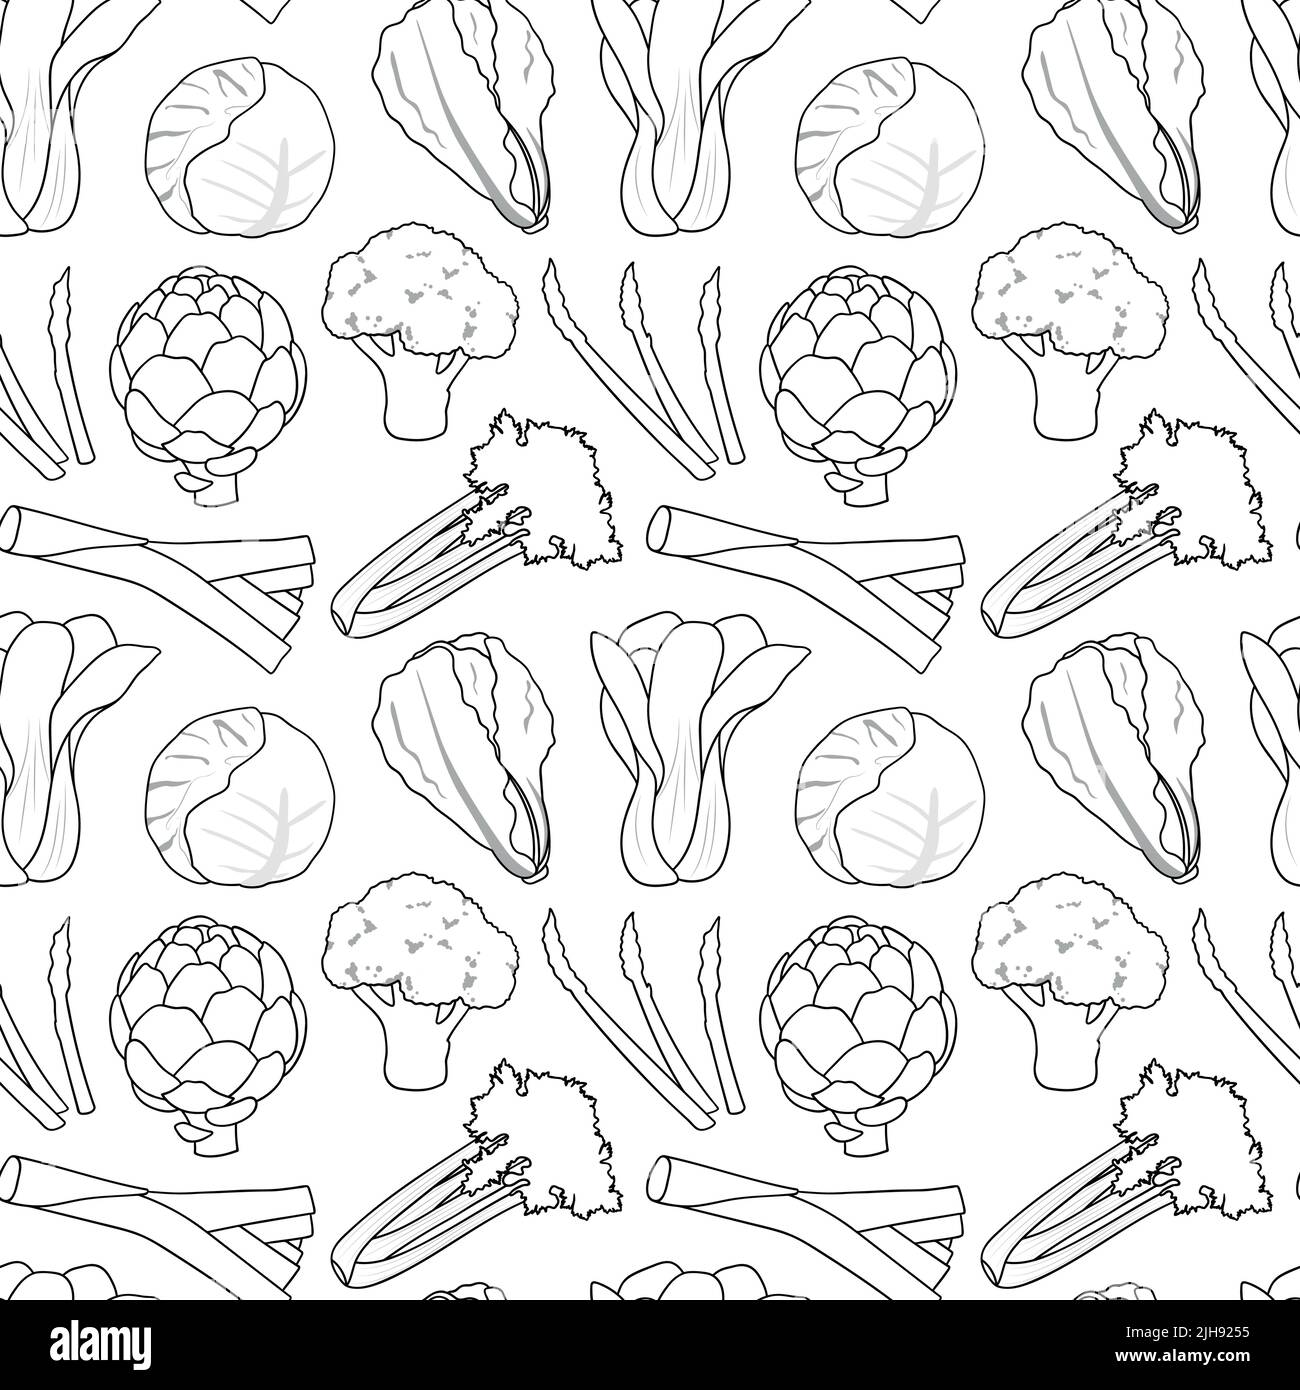 Seamless vector pattern background of leafy green vegetables made of simple illustrations. Stock Vector